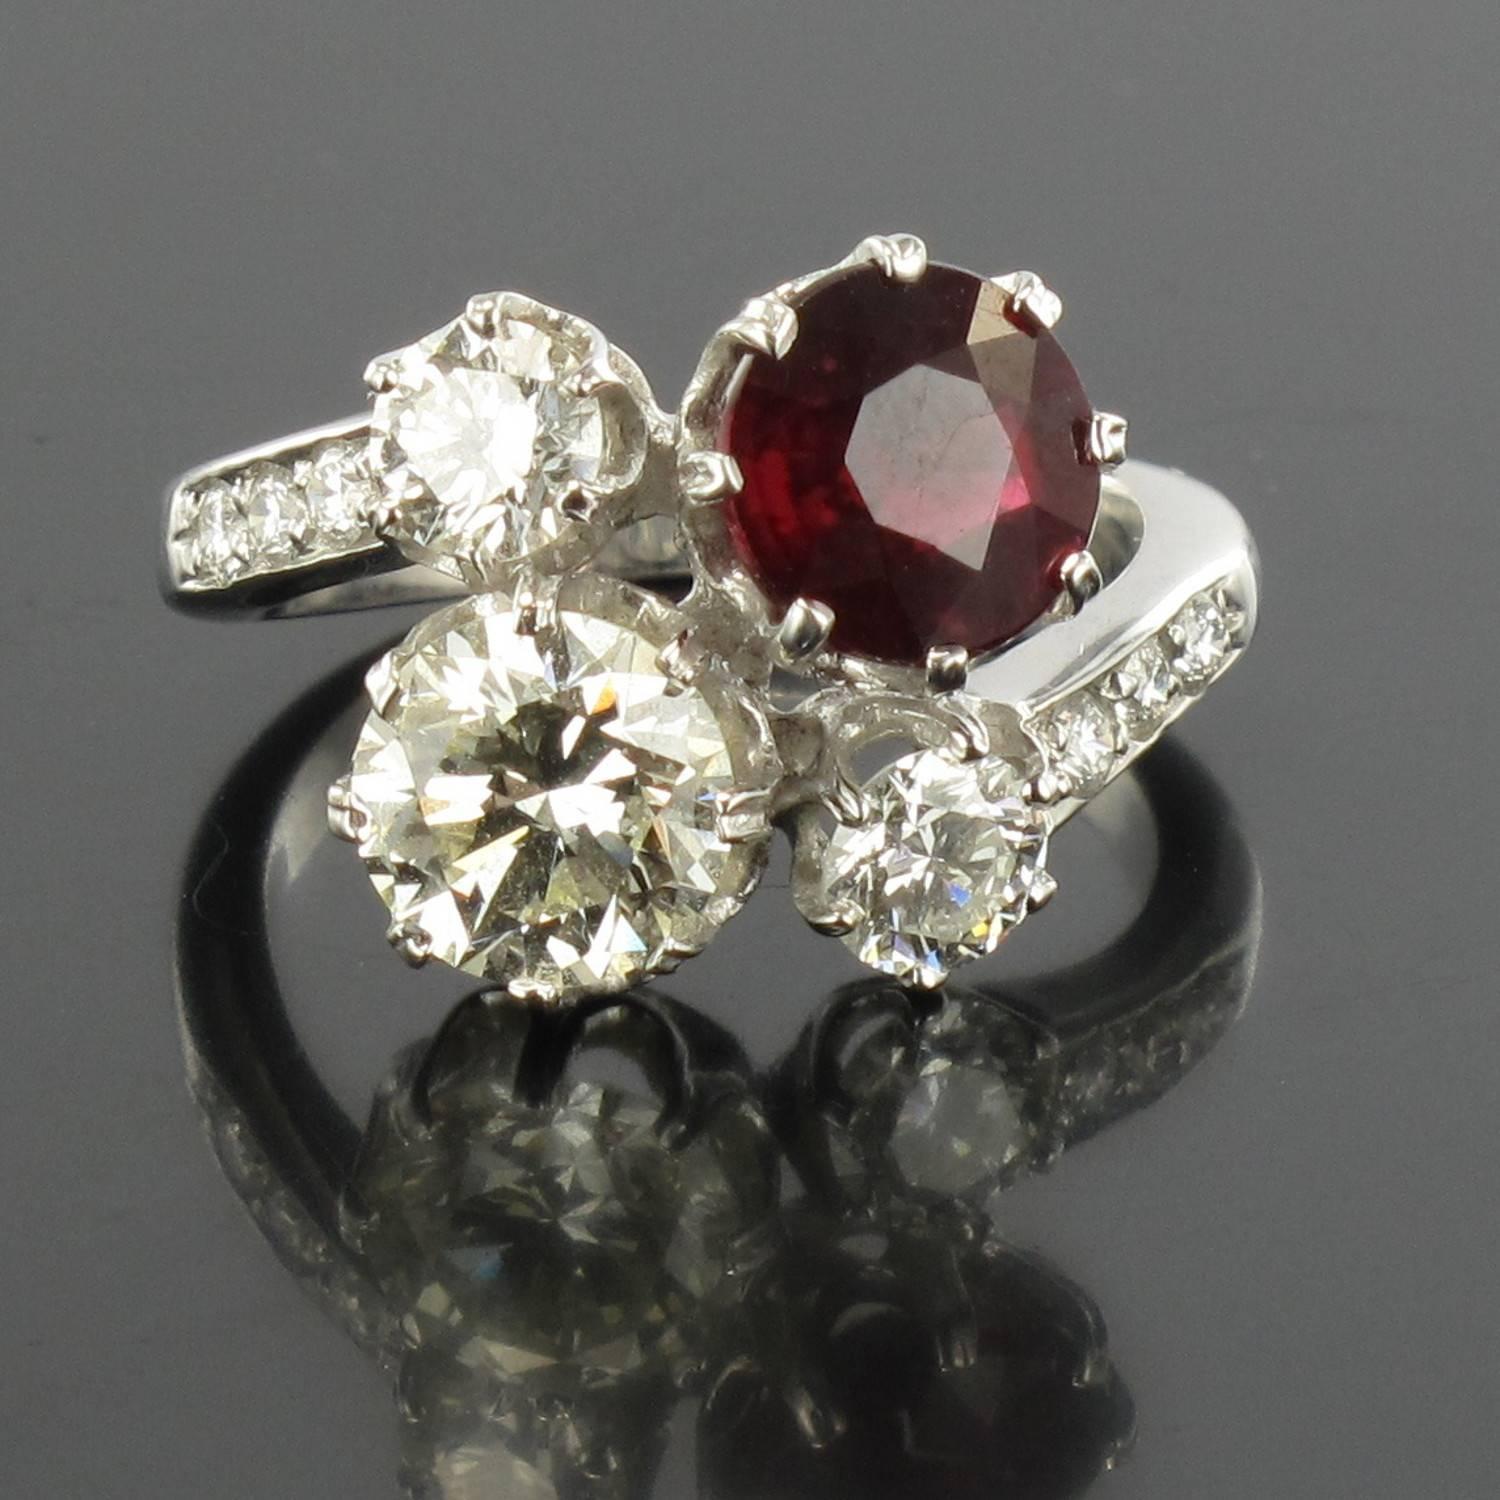 Ring in 18 carat white gold, eagle head hallmark. 

Featuring a claw set round ruby and a brilliant cut diamond, another smaller diamond is set at each side with a further 3 small diamonds leading into the ring band on each side. 

Ruby Weight :